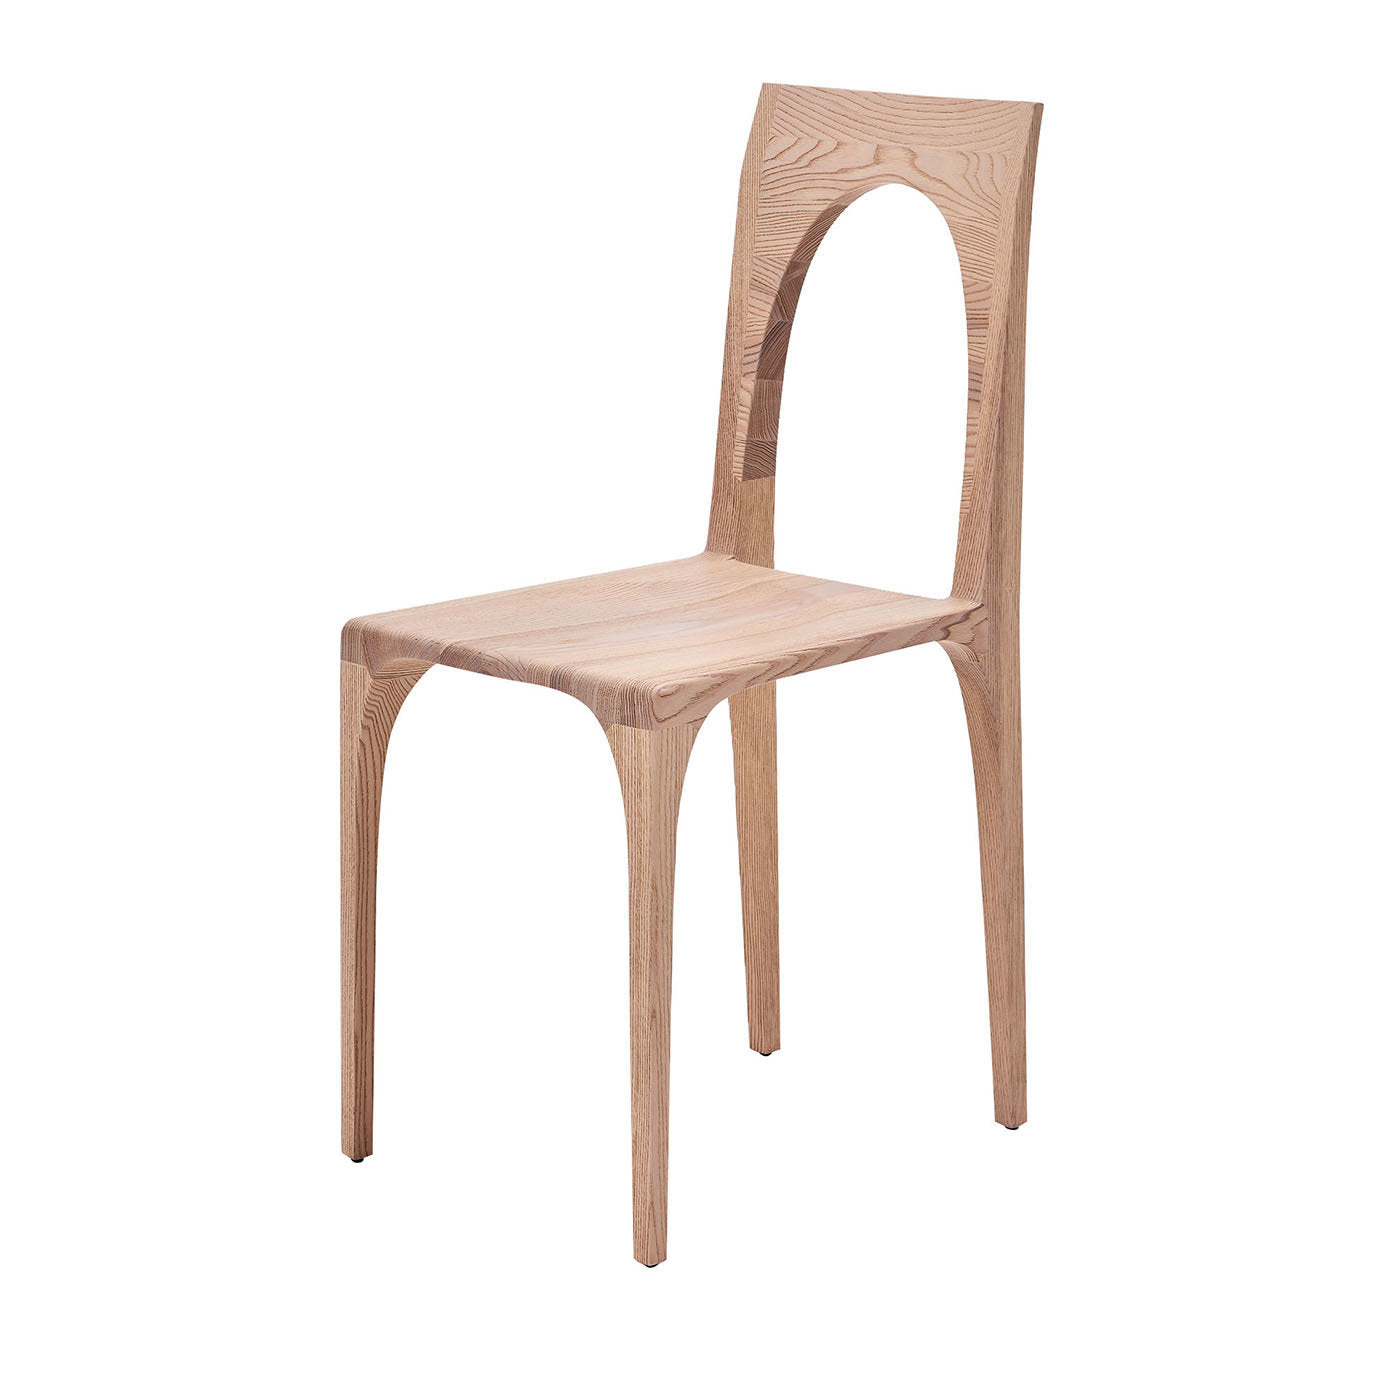 Gio Set of 2 Bleached Ash Wood Chairs  - Main view